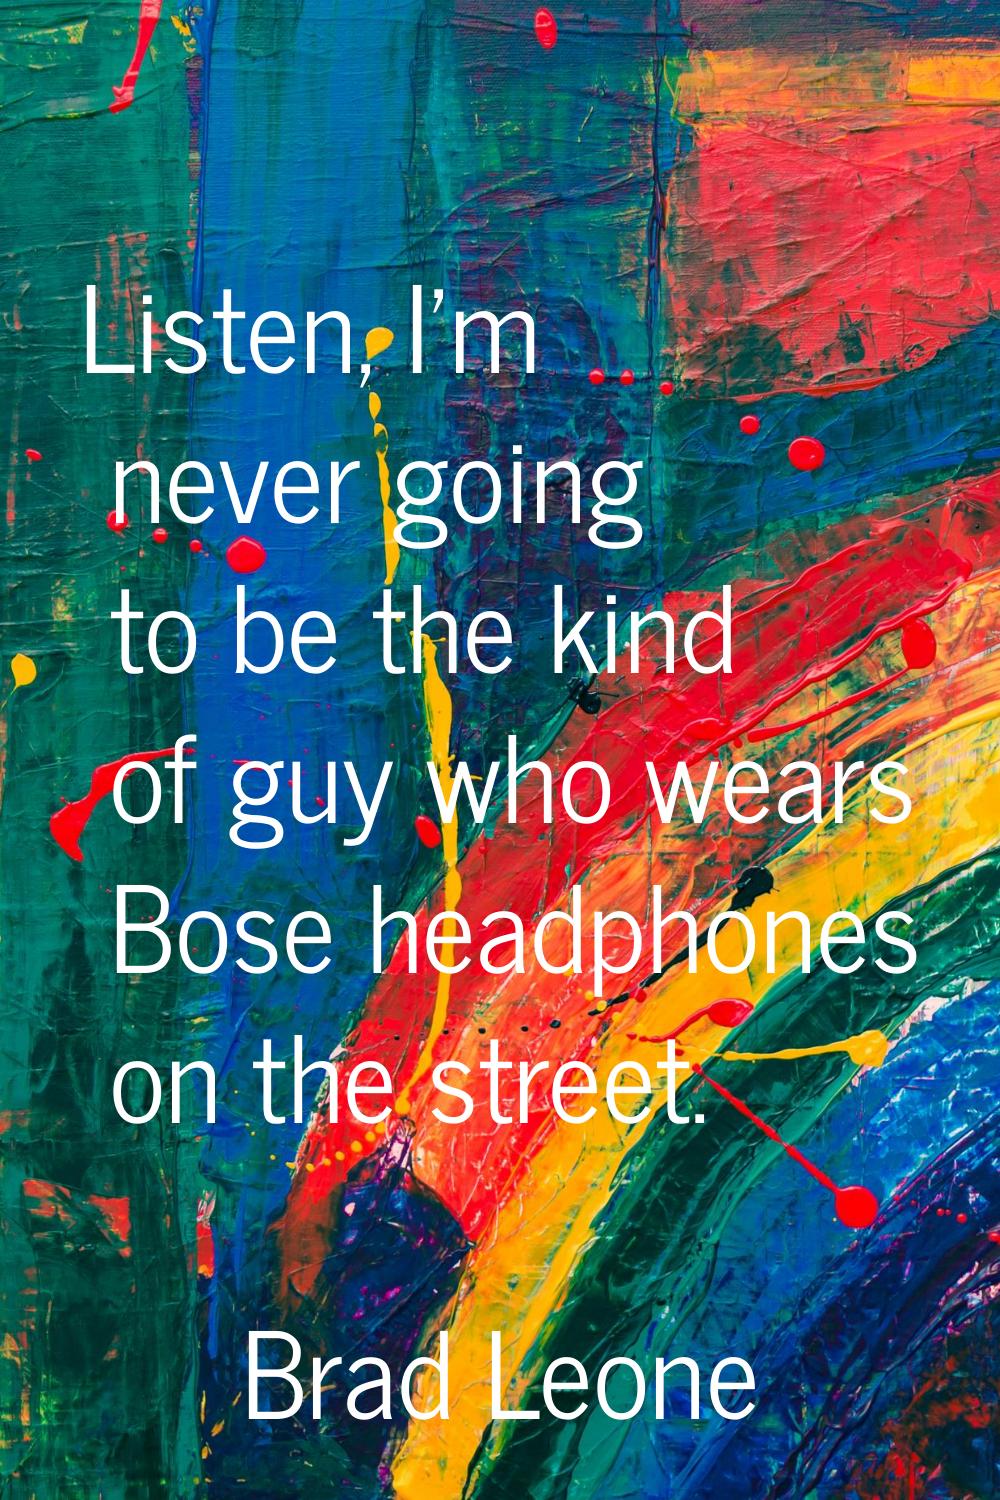 Listen, I'm never going to be the kind of guy who wears Bose headphones on the street.